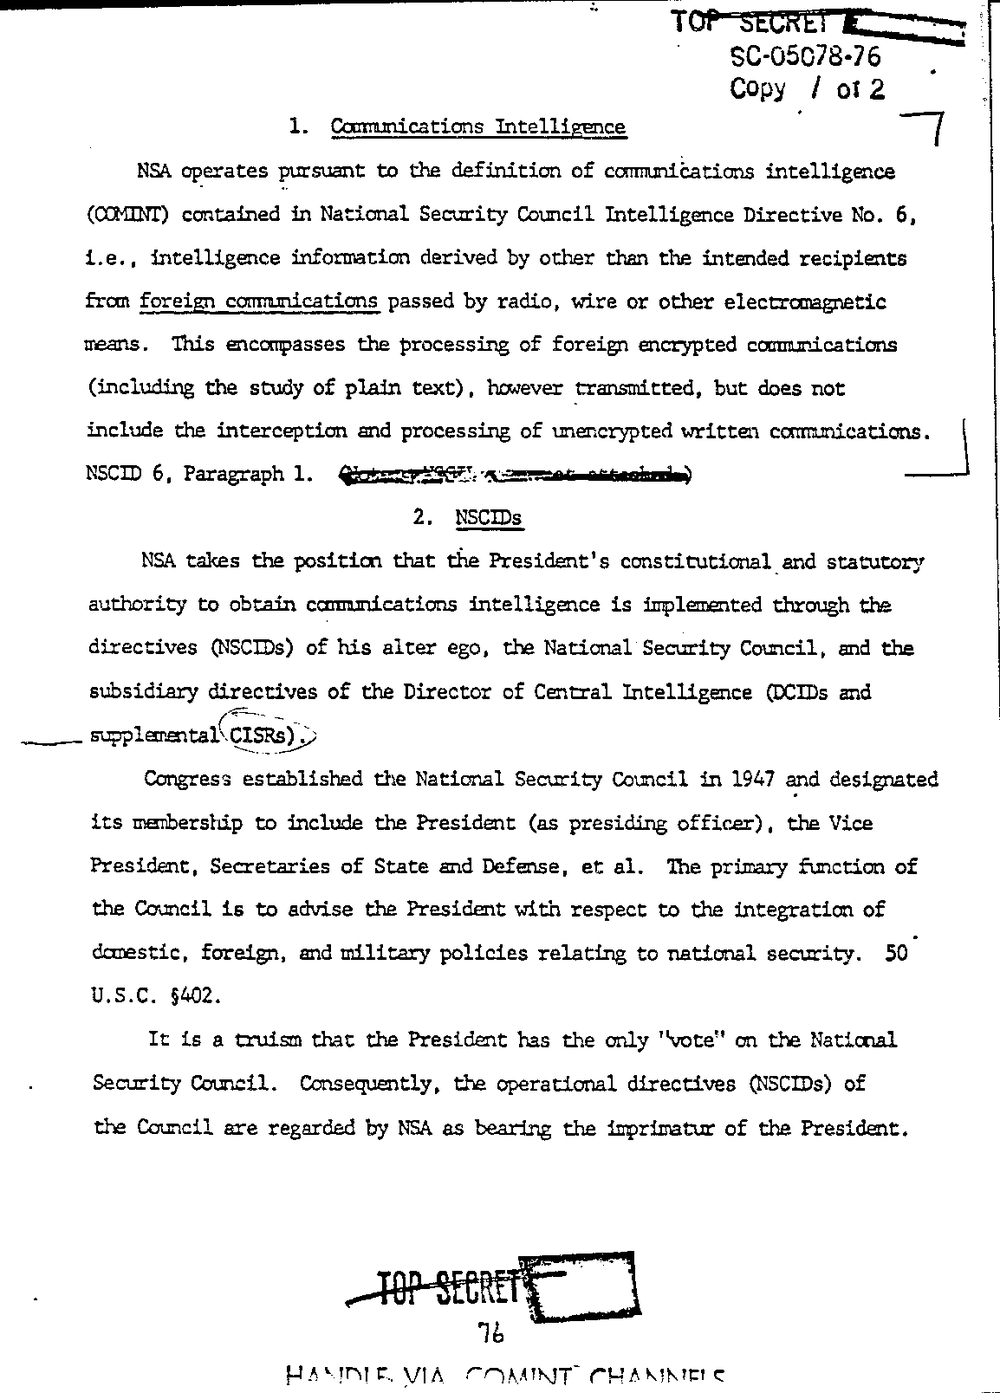 Page 84 from Report on Inquiry Into CIA Related Electronic Surveillance Activities